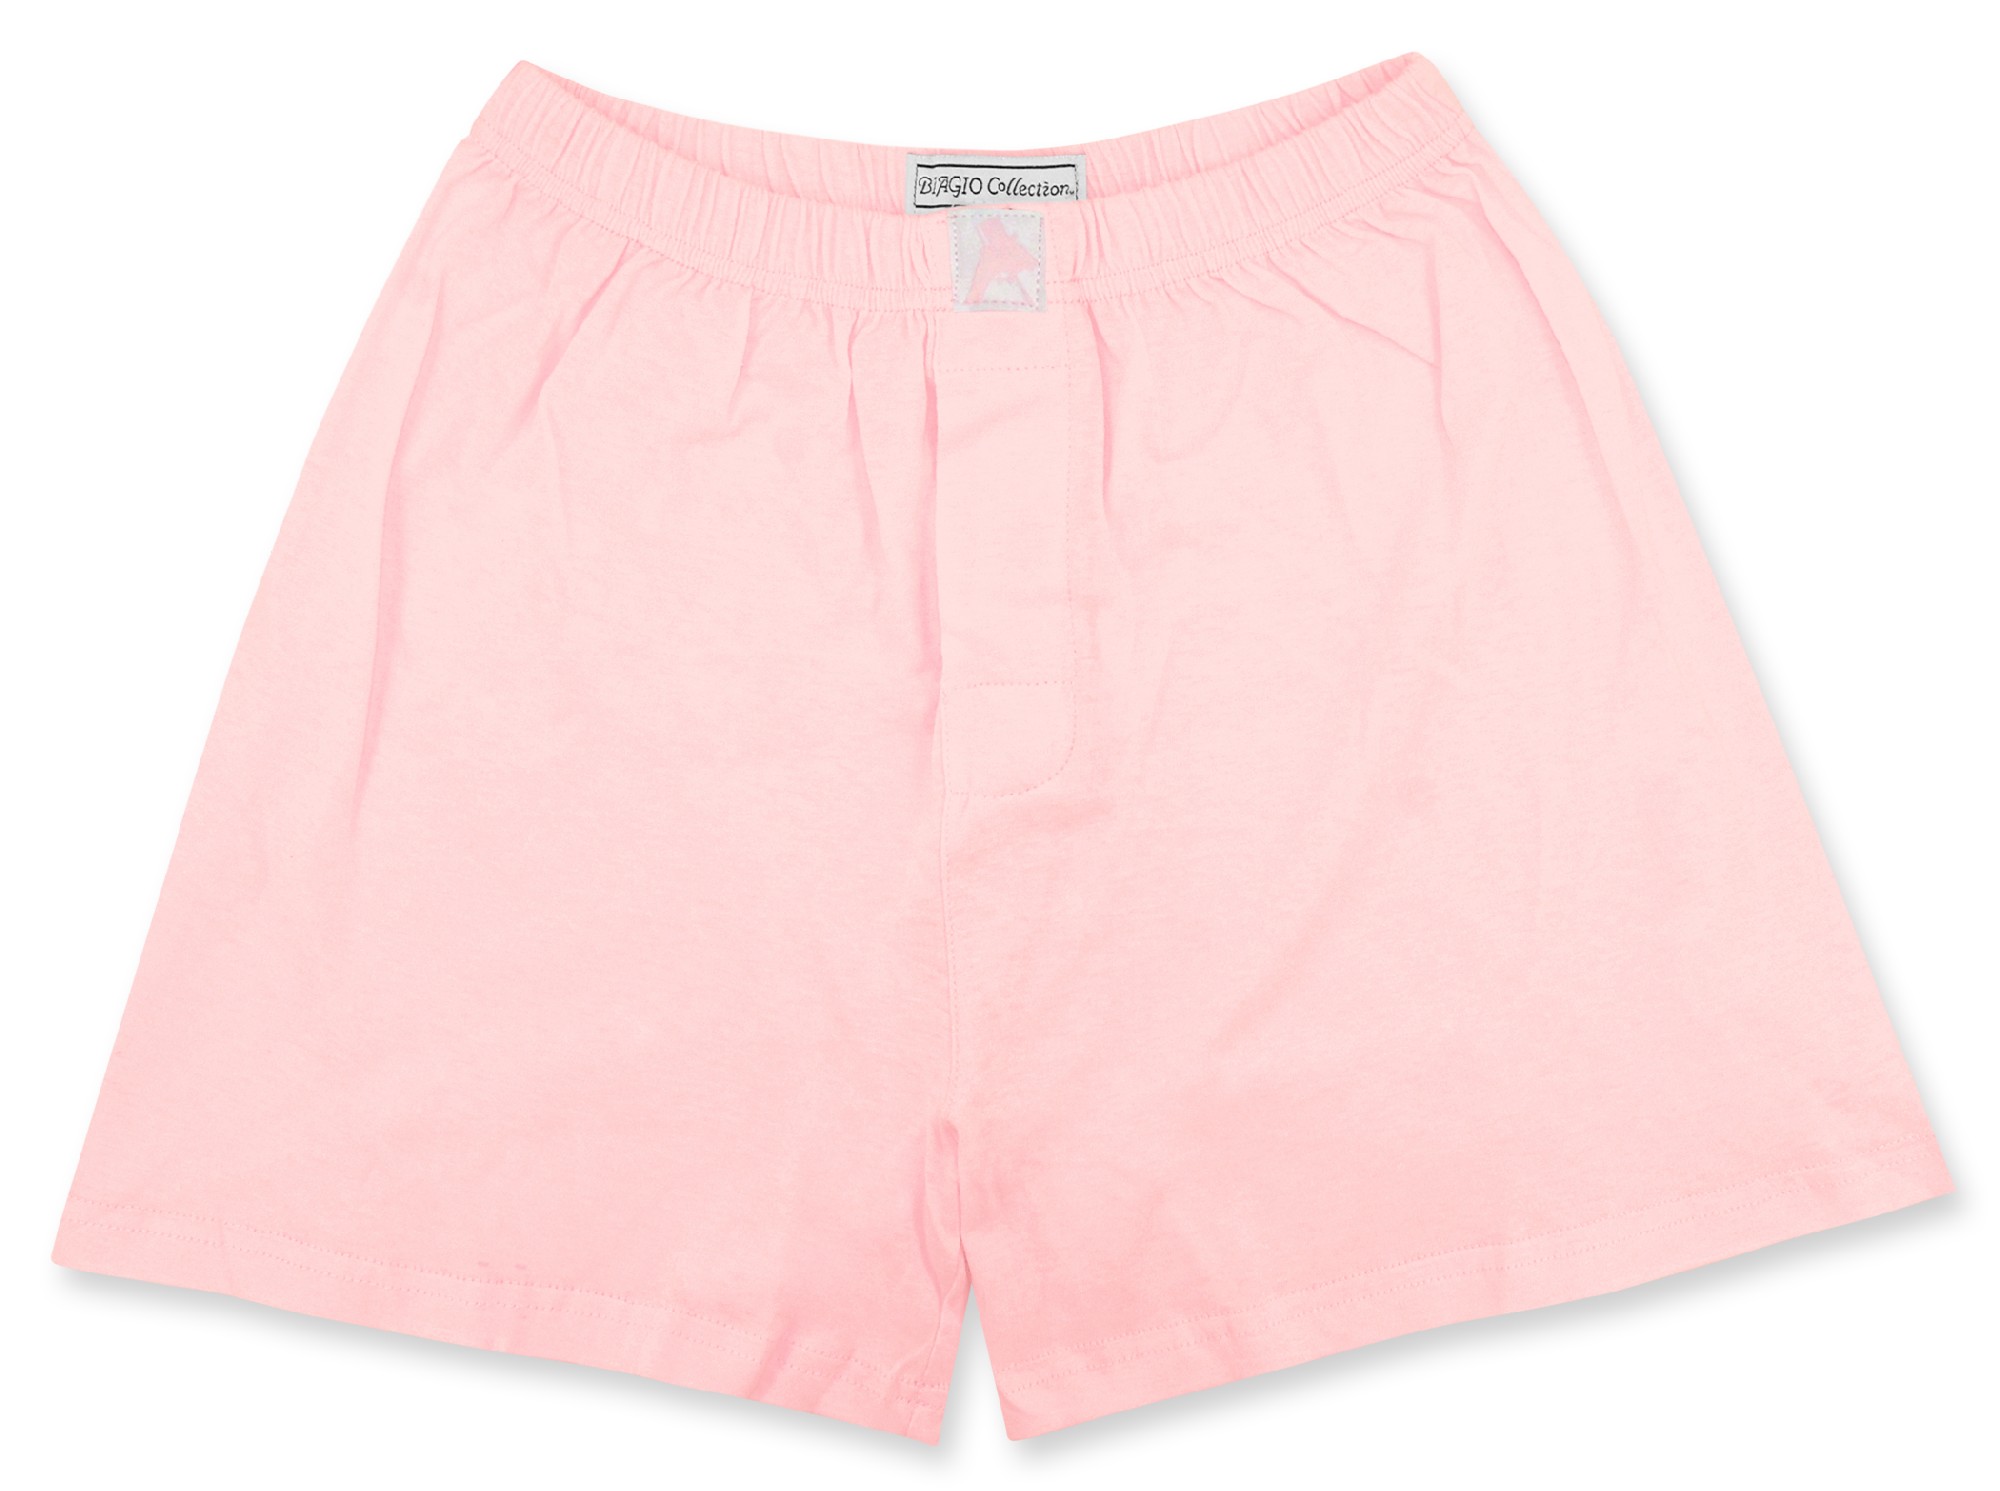 Biagio Mens Solid Light Pink Color BOXER 100% Knit Cotton Shorts